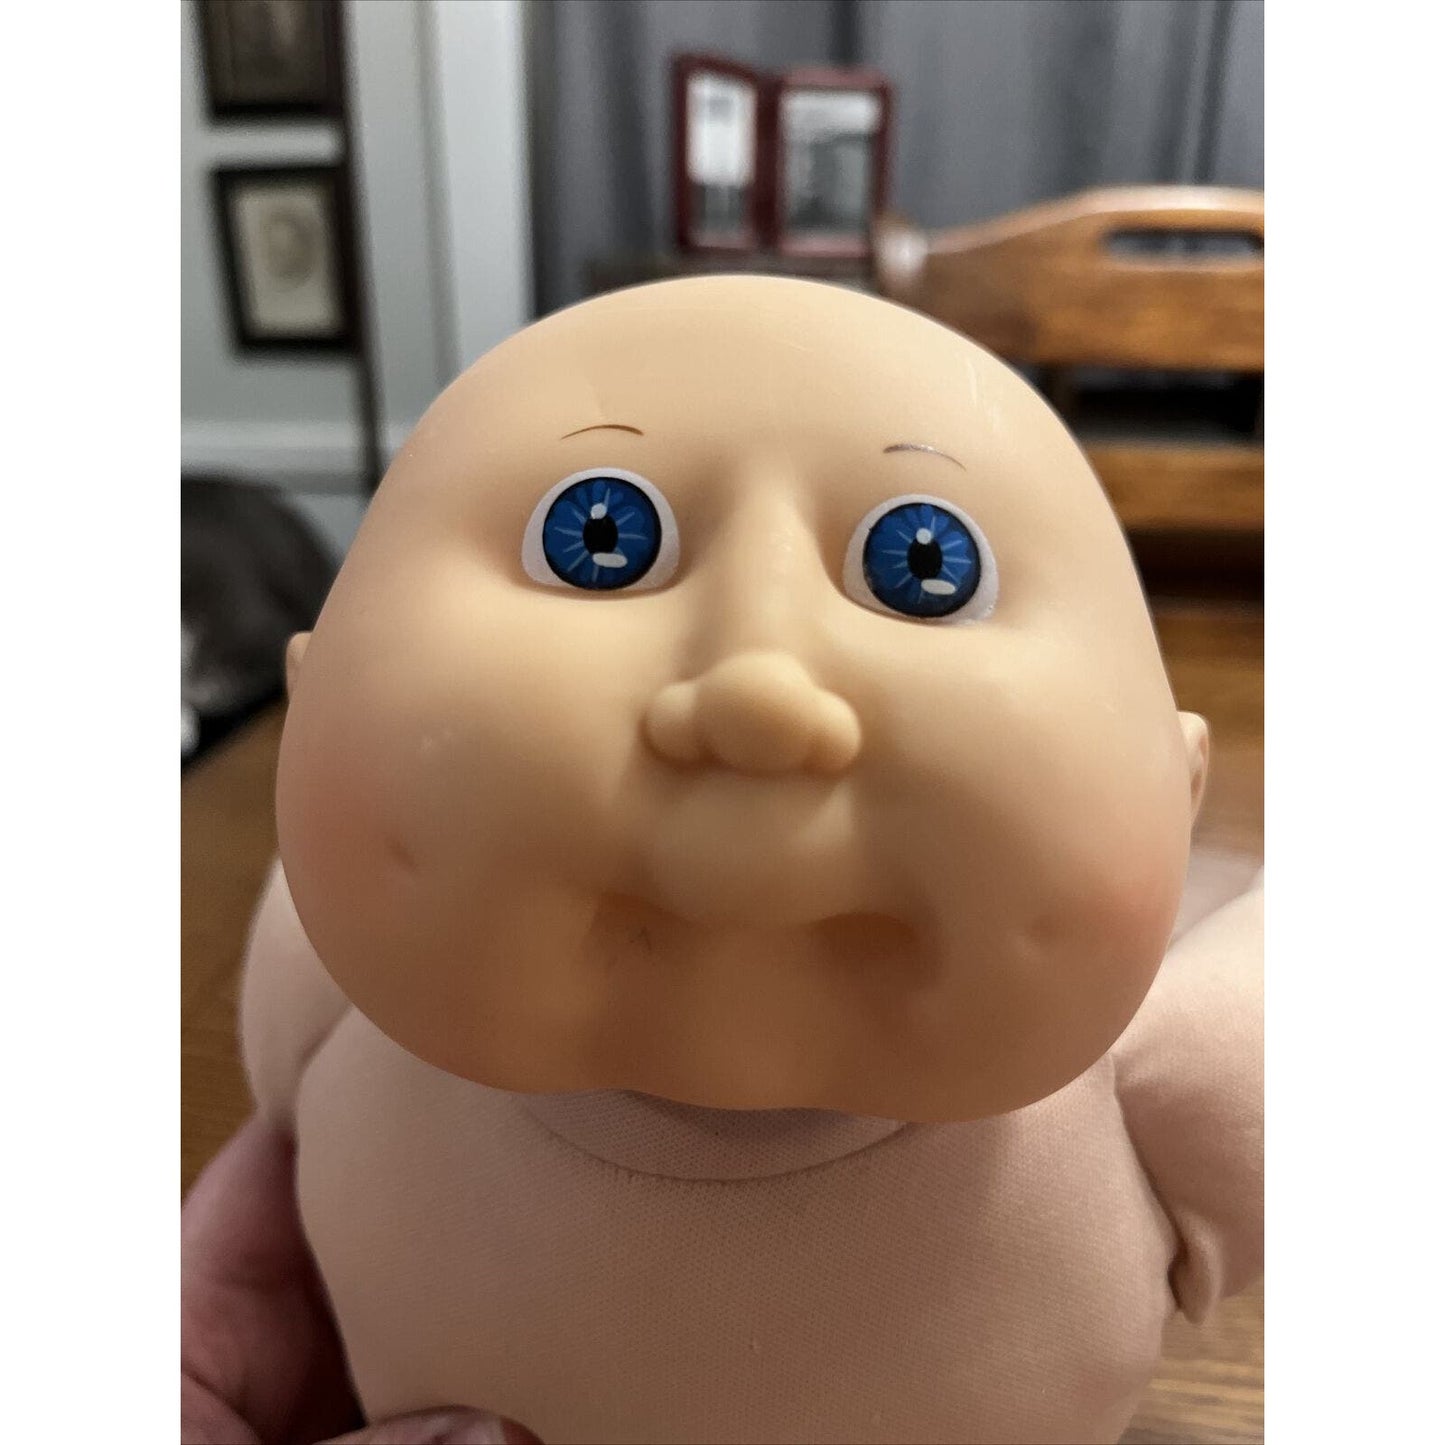 1980s Cabbage Patch Kid Bald Blue Eyes Dimples Blush Outer Space Footie Pajamas